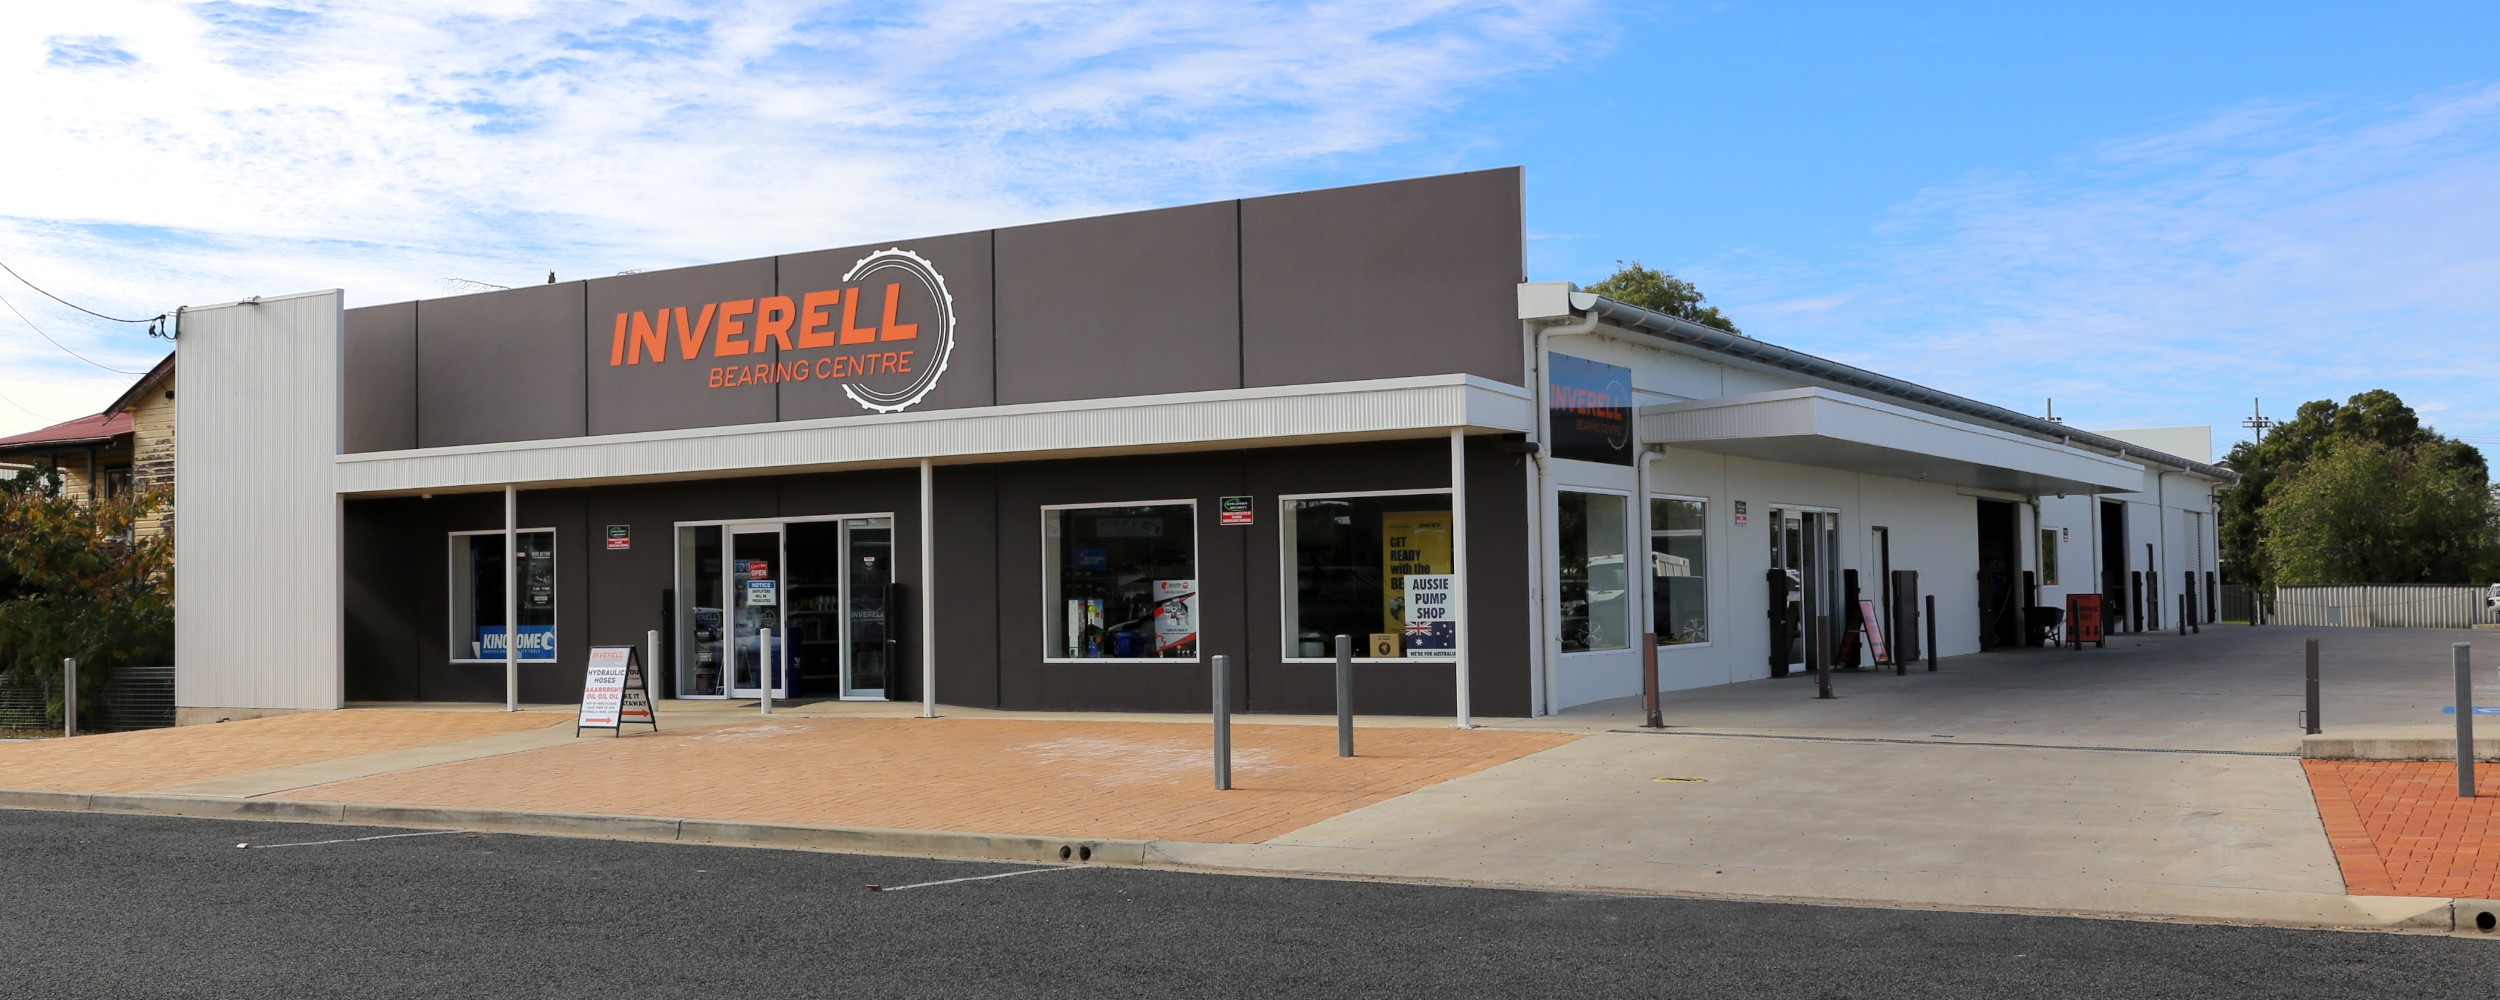 Serving the Inverell Community since 1979